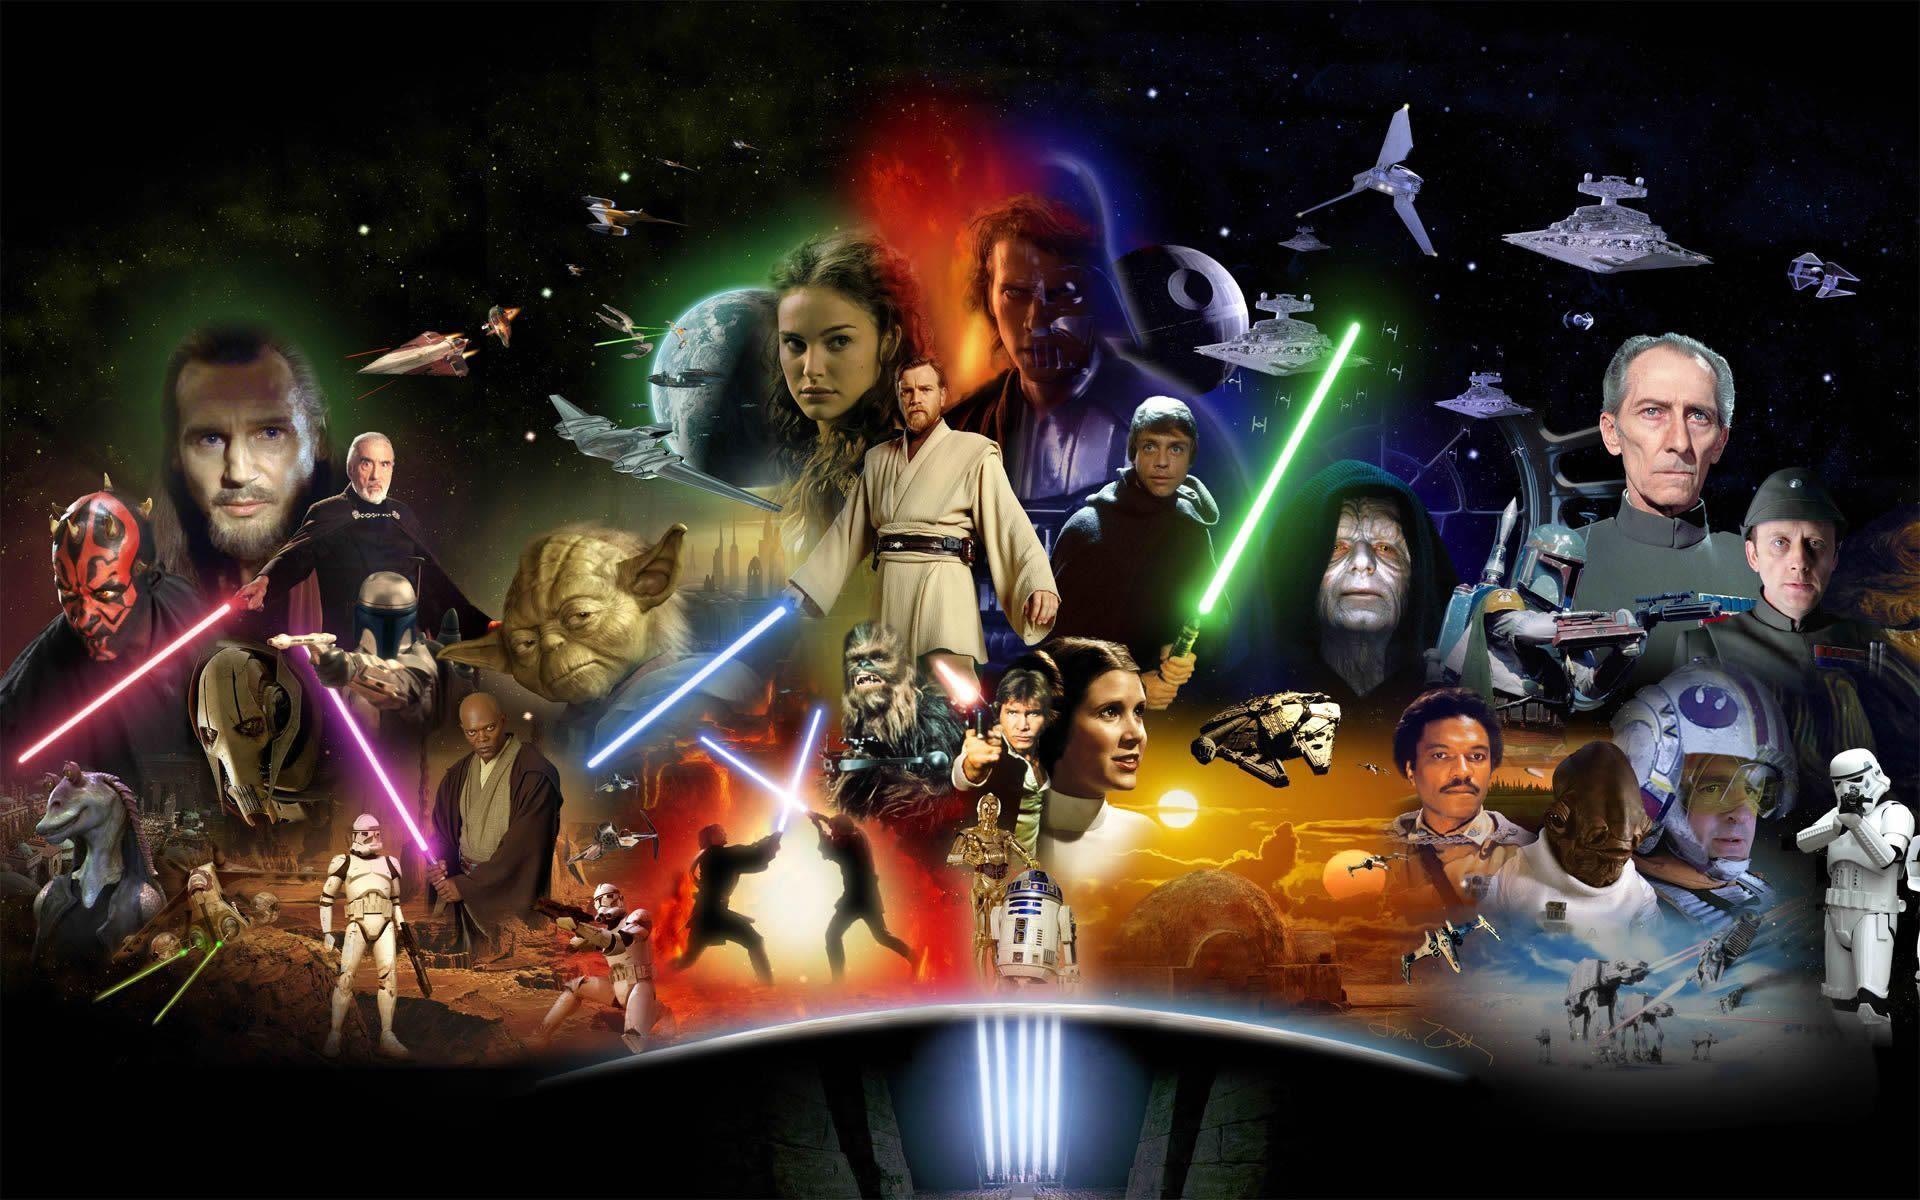 Epic Star Wars Wallpapers - Wallpaper Cave